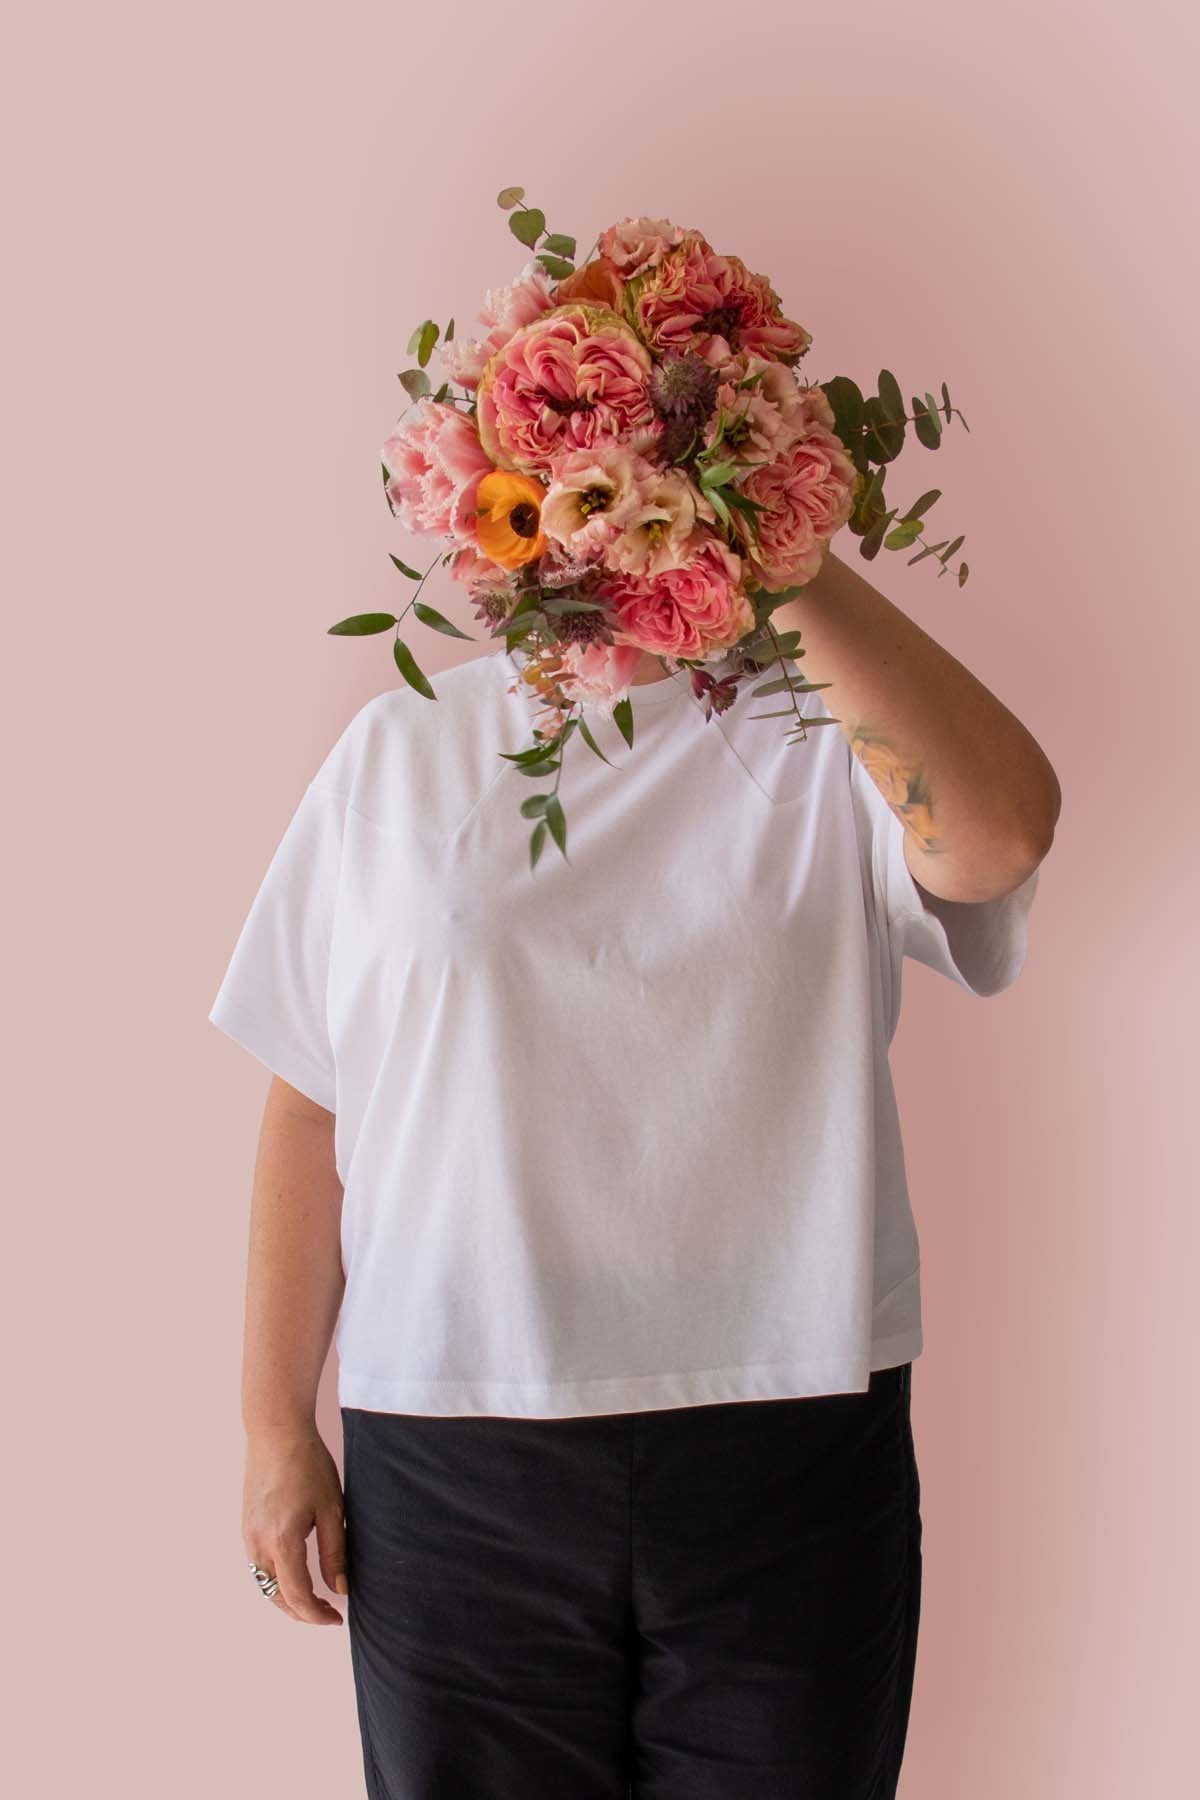 Asmuss Panelled T-shirt in White Organic Cotton and Recycled Polyester worn by Clare with a beautiful bunch of flowers in front of her face.